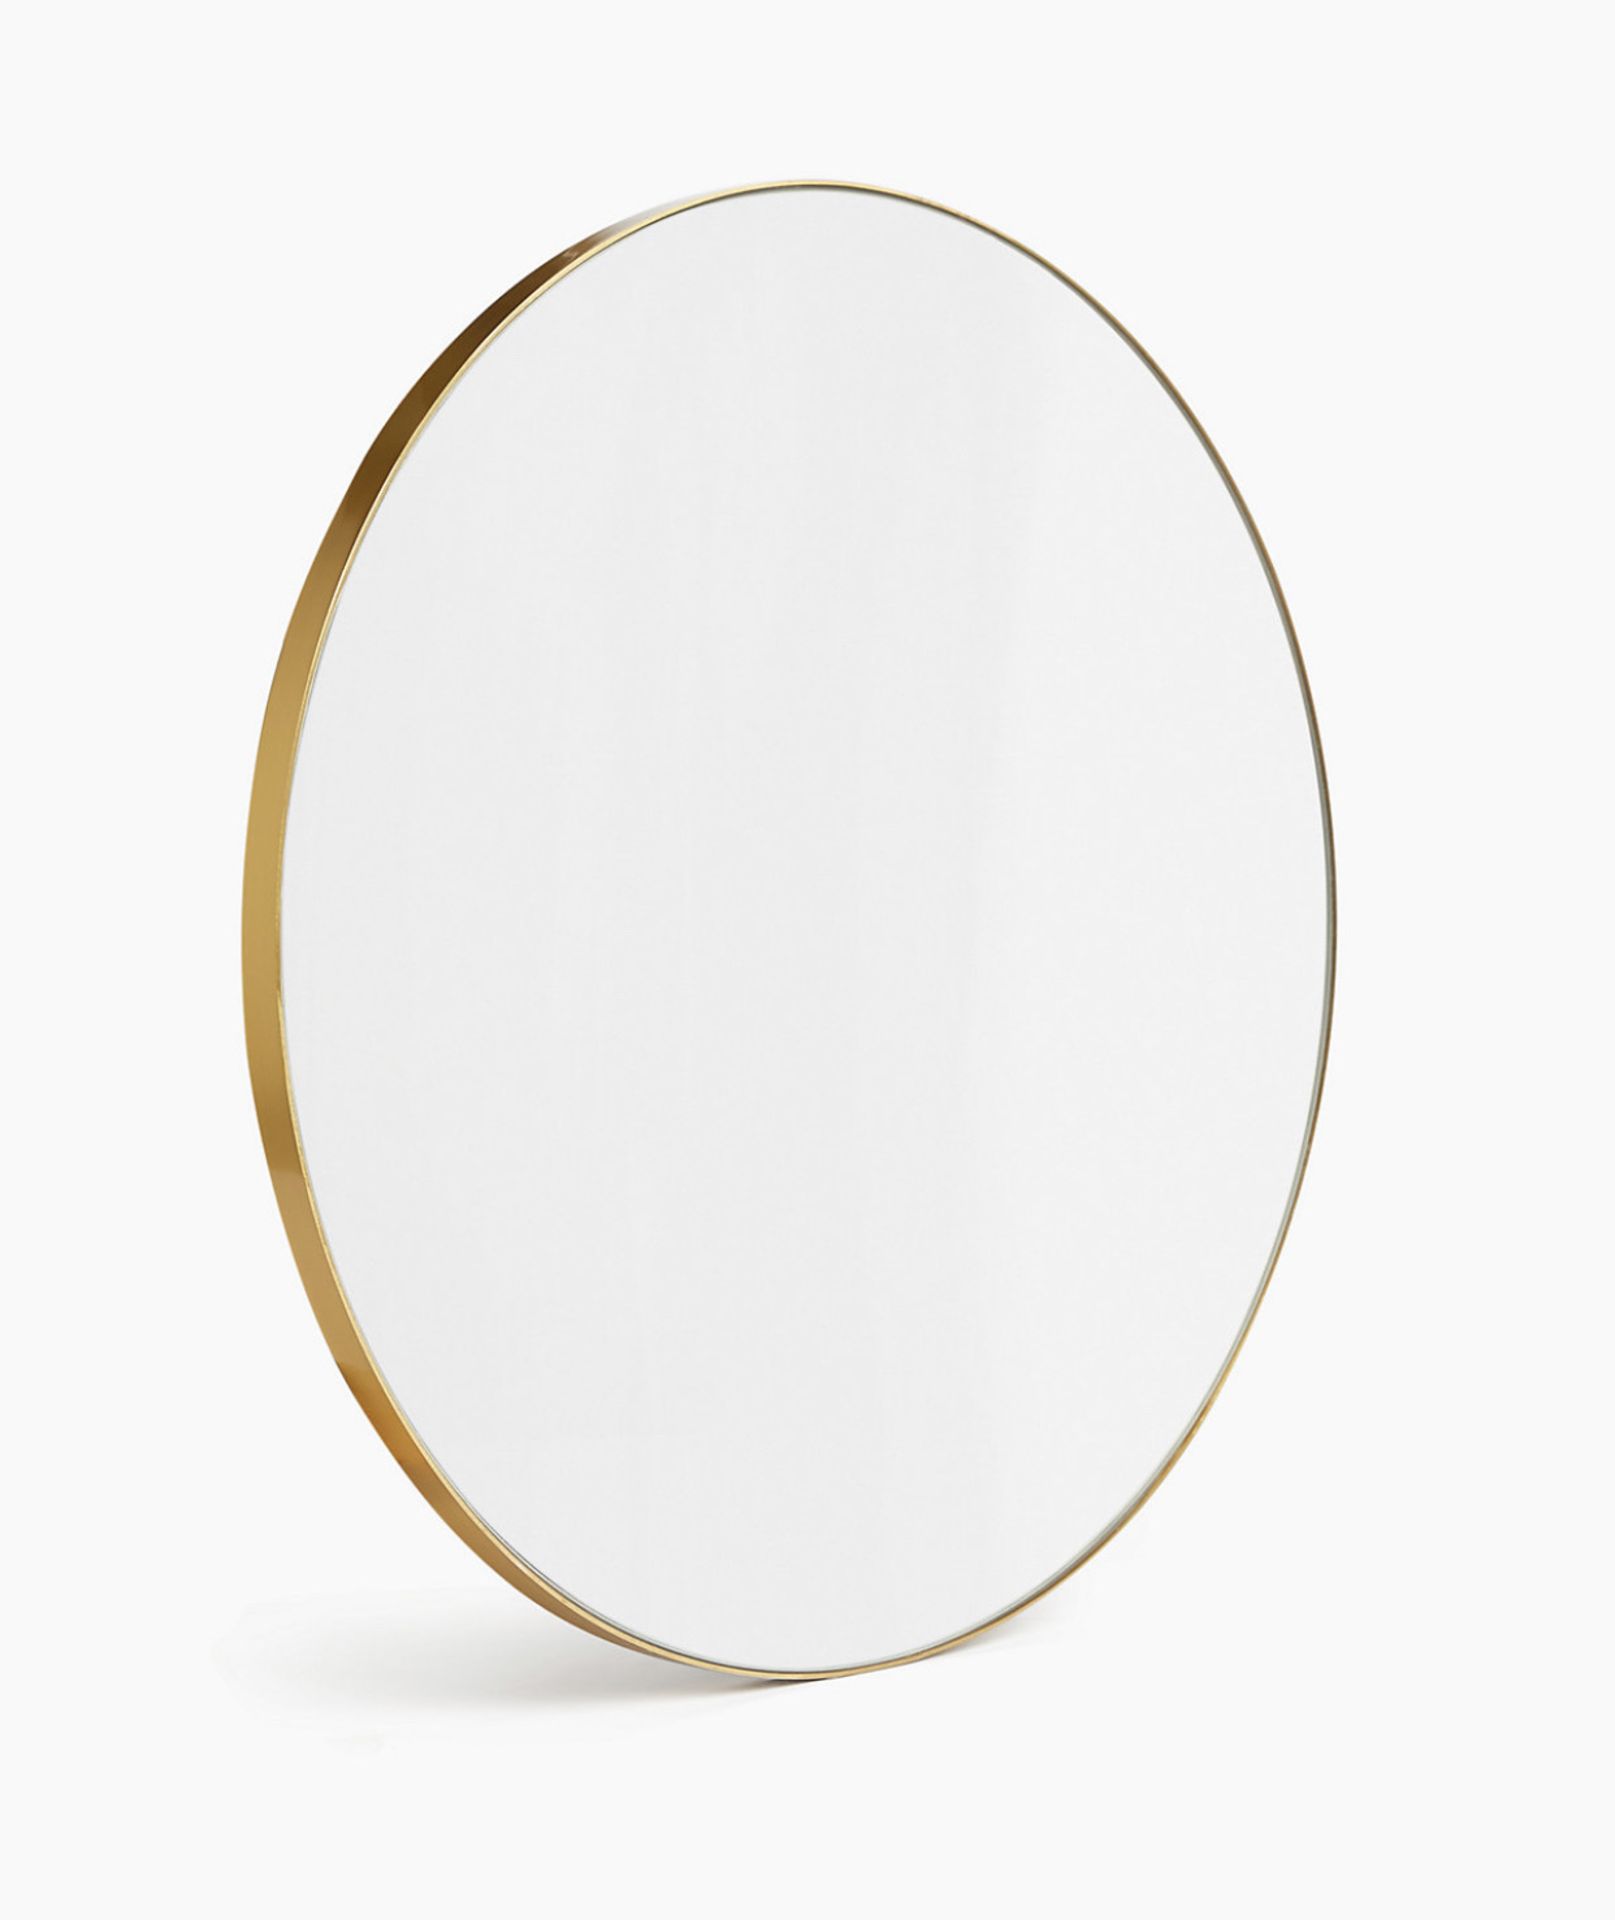 Milan Small Round Mirror, Antique Brass (colour may vary, see image) RRP £69